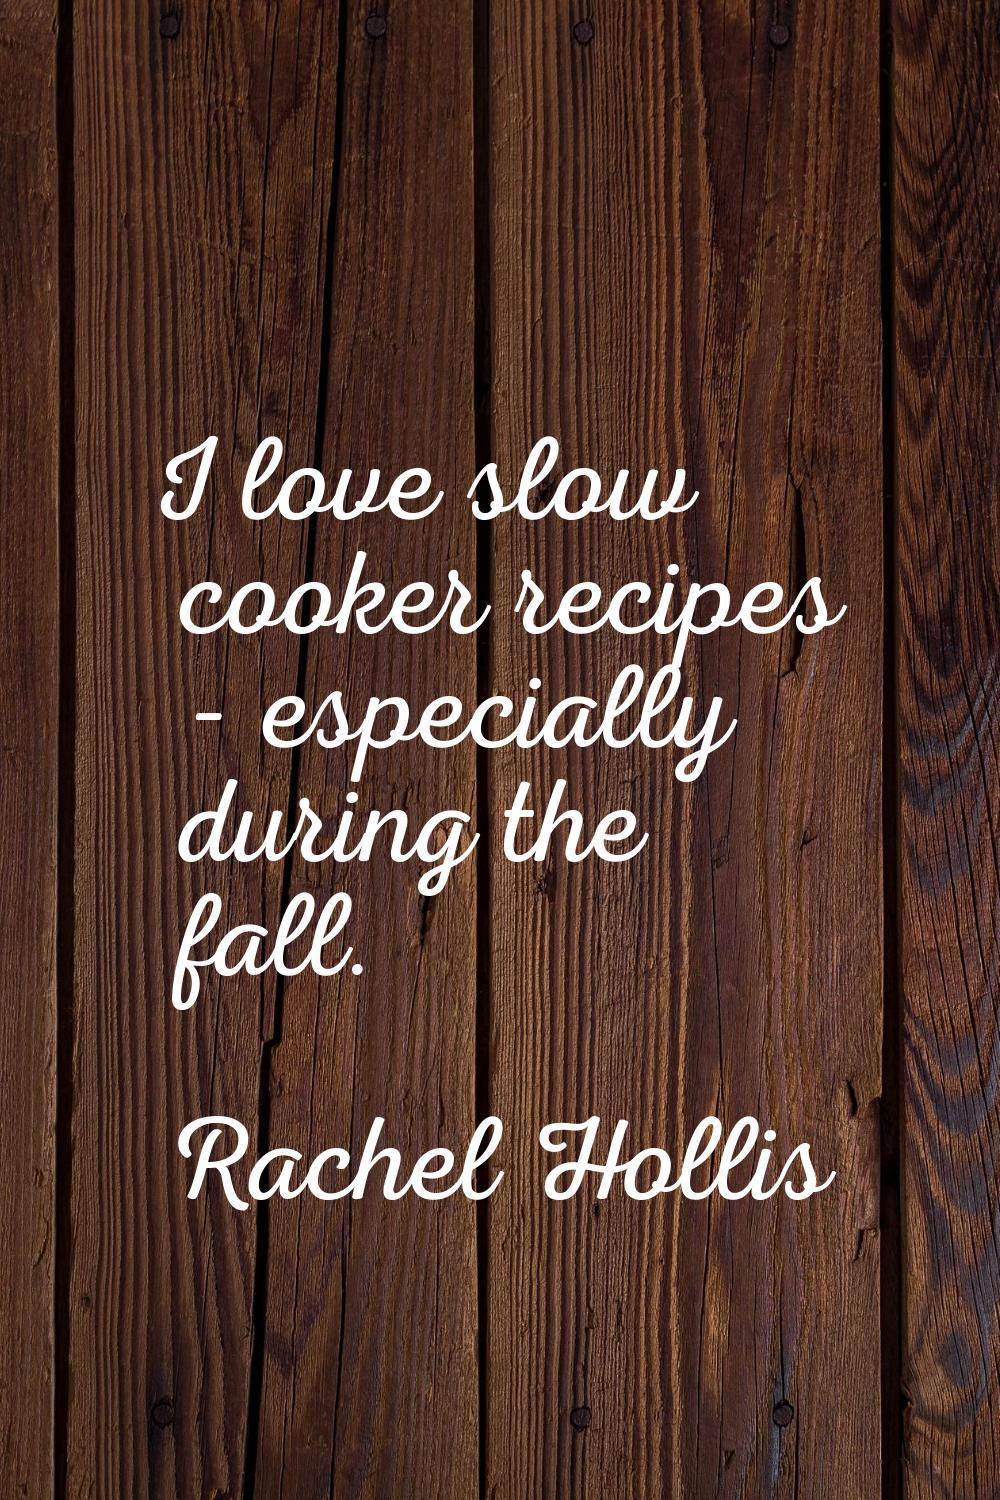 I love slow cooker recipes - especially during the fall.